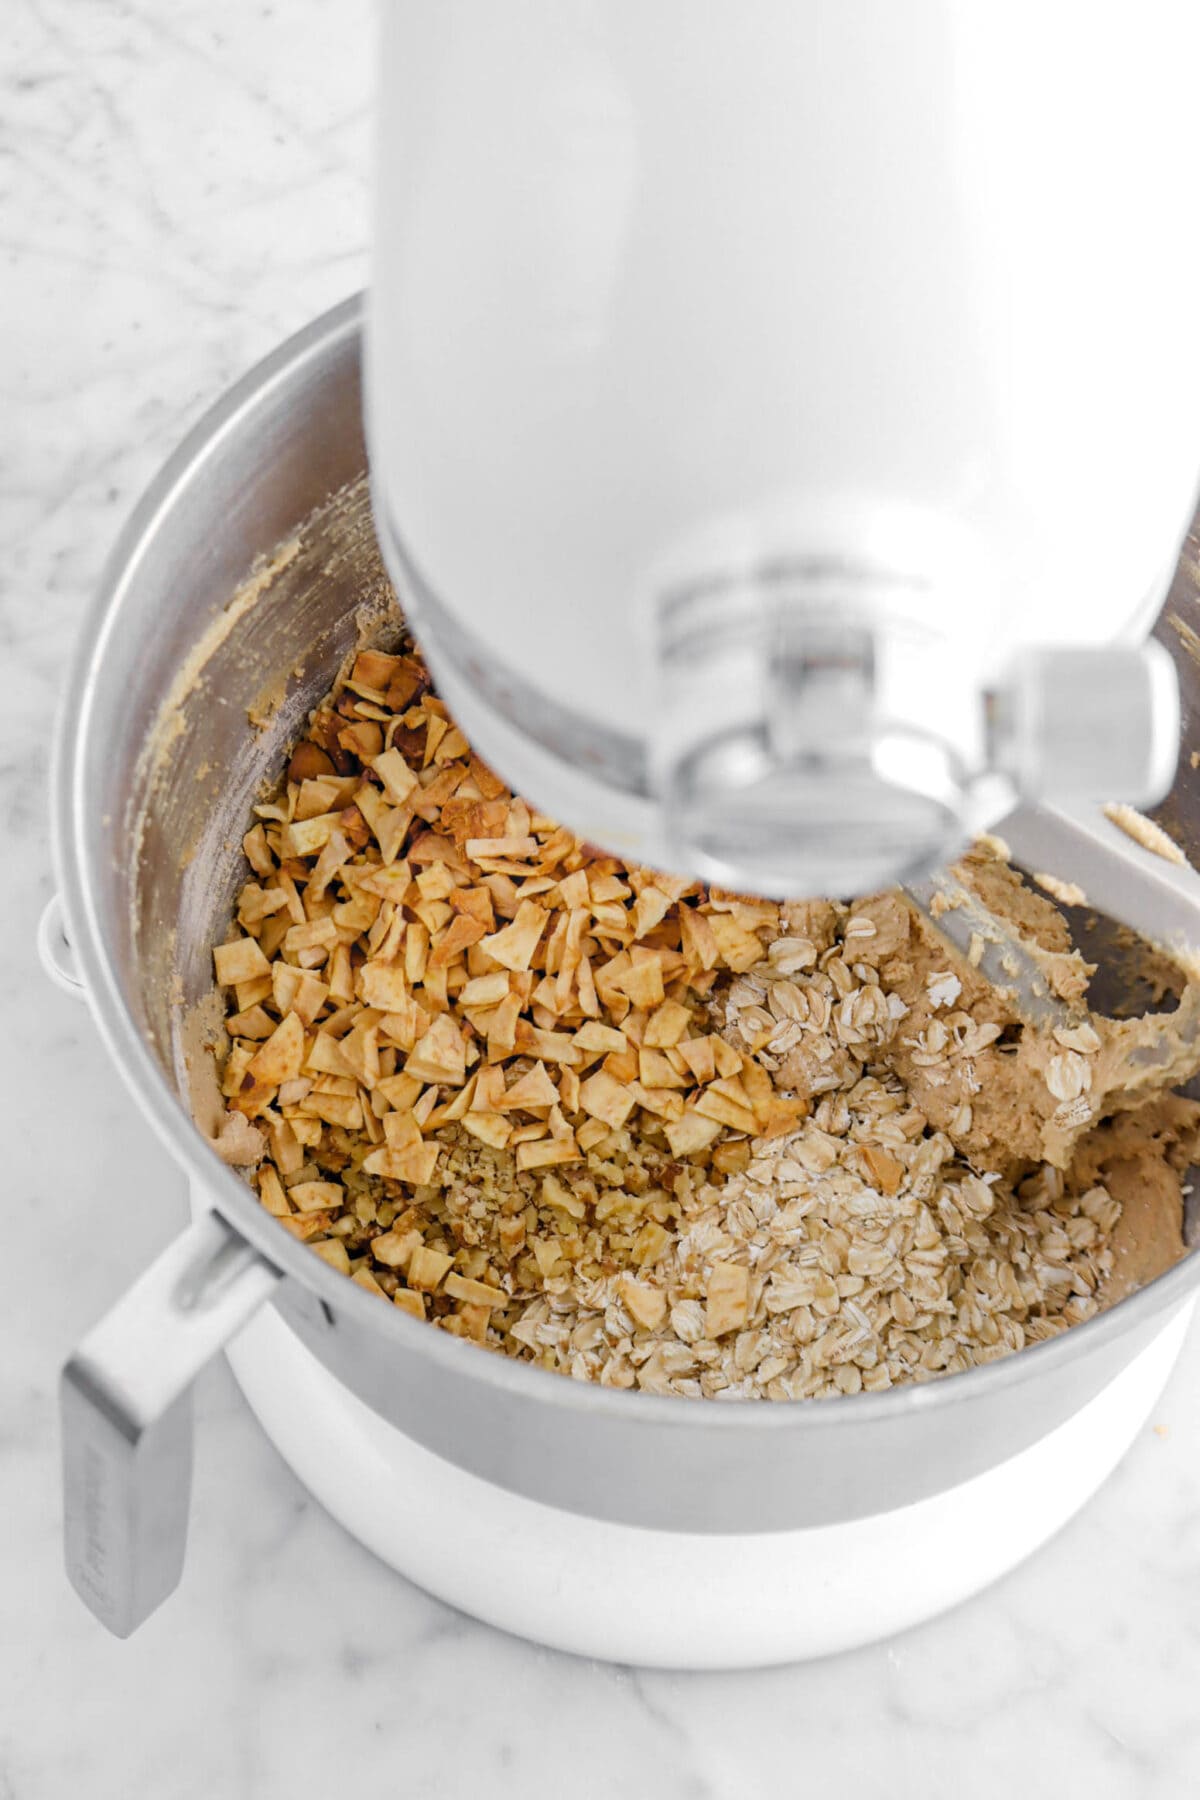 dried apples, walnuts, and oatmeal in mixer bowl.